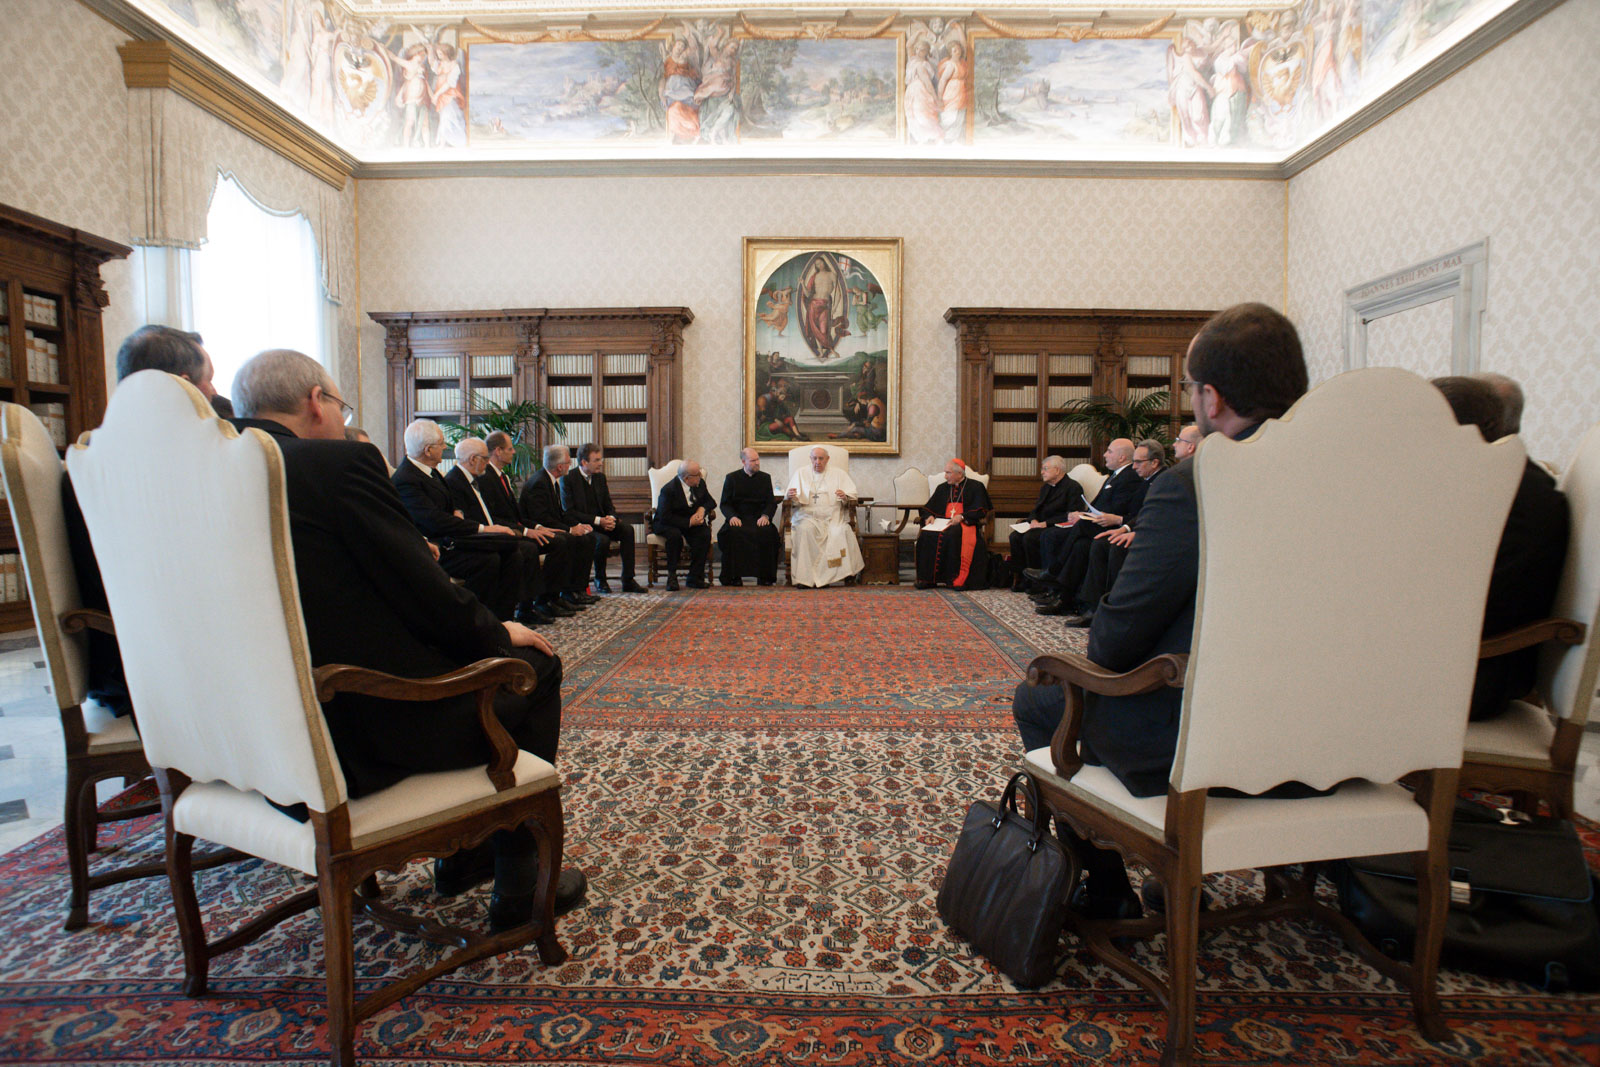 The Order of Malta’s reform in the audience with the Pope